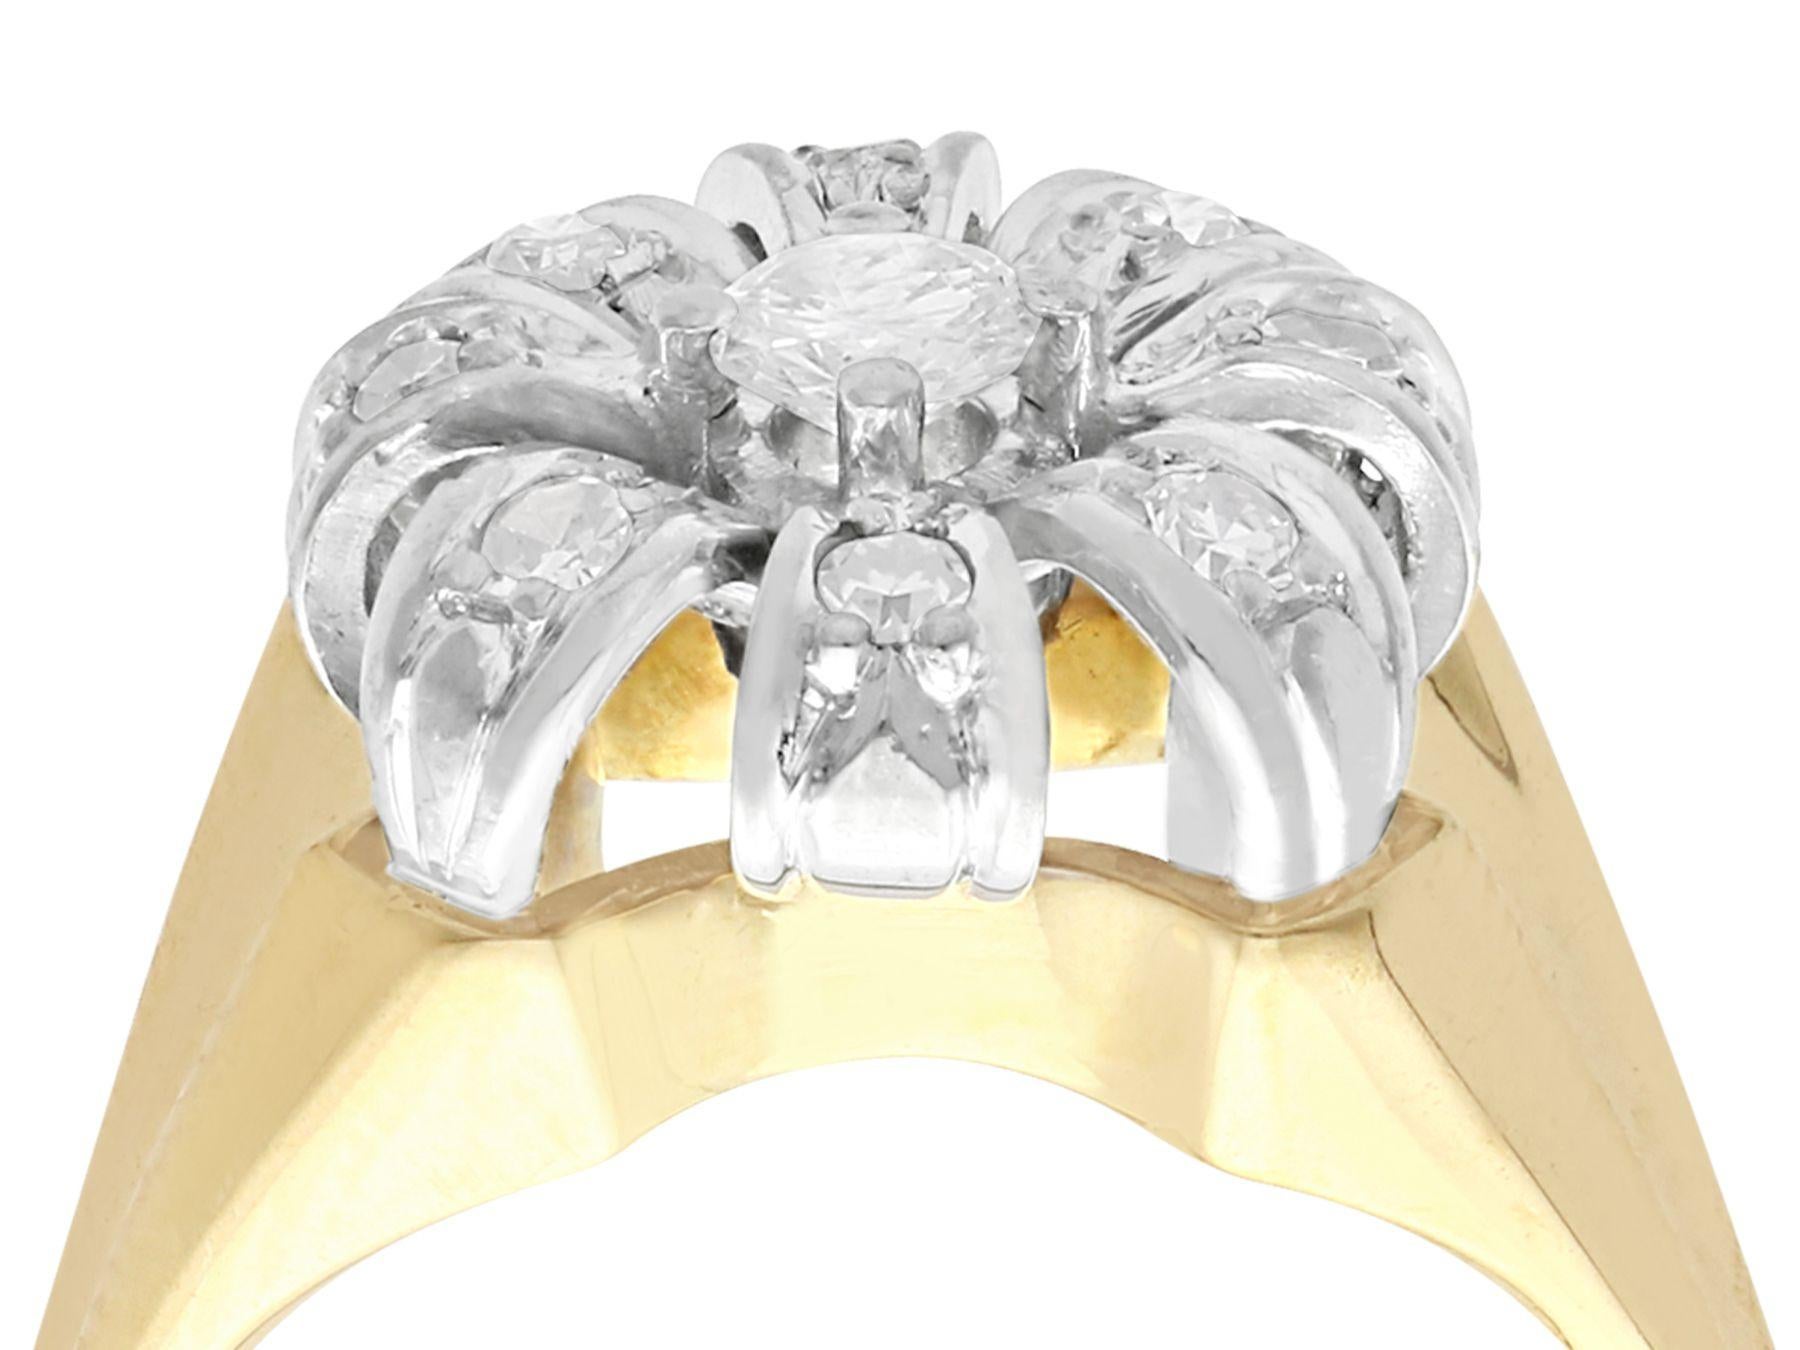 An impressive vintage European 0.41 carat diamond and 14 karat yellow gold, 14 karat white gold set cluster ring; part of our diverse diamond jewelry collections.

This fine and impressive 1950s cluster ring has been crafted in 14k yellow gold with